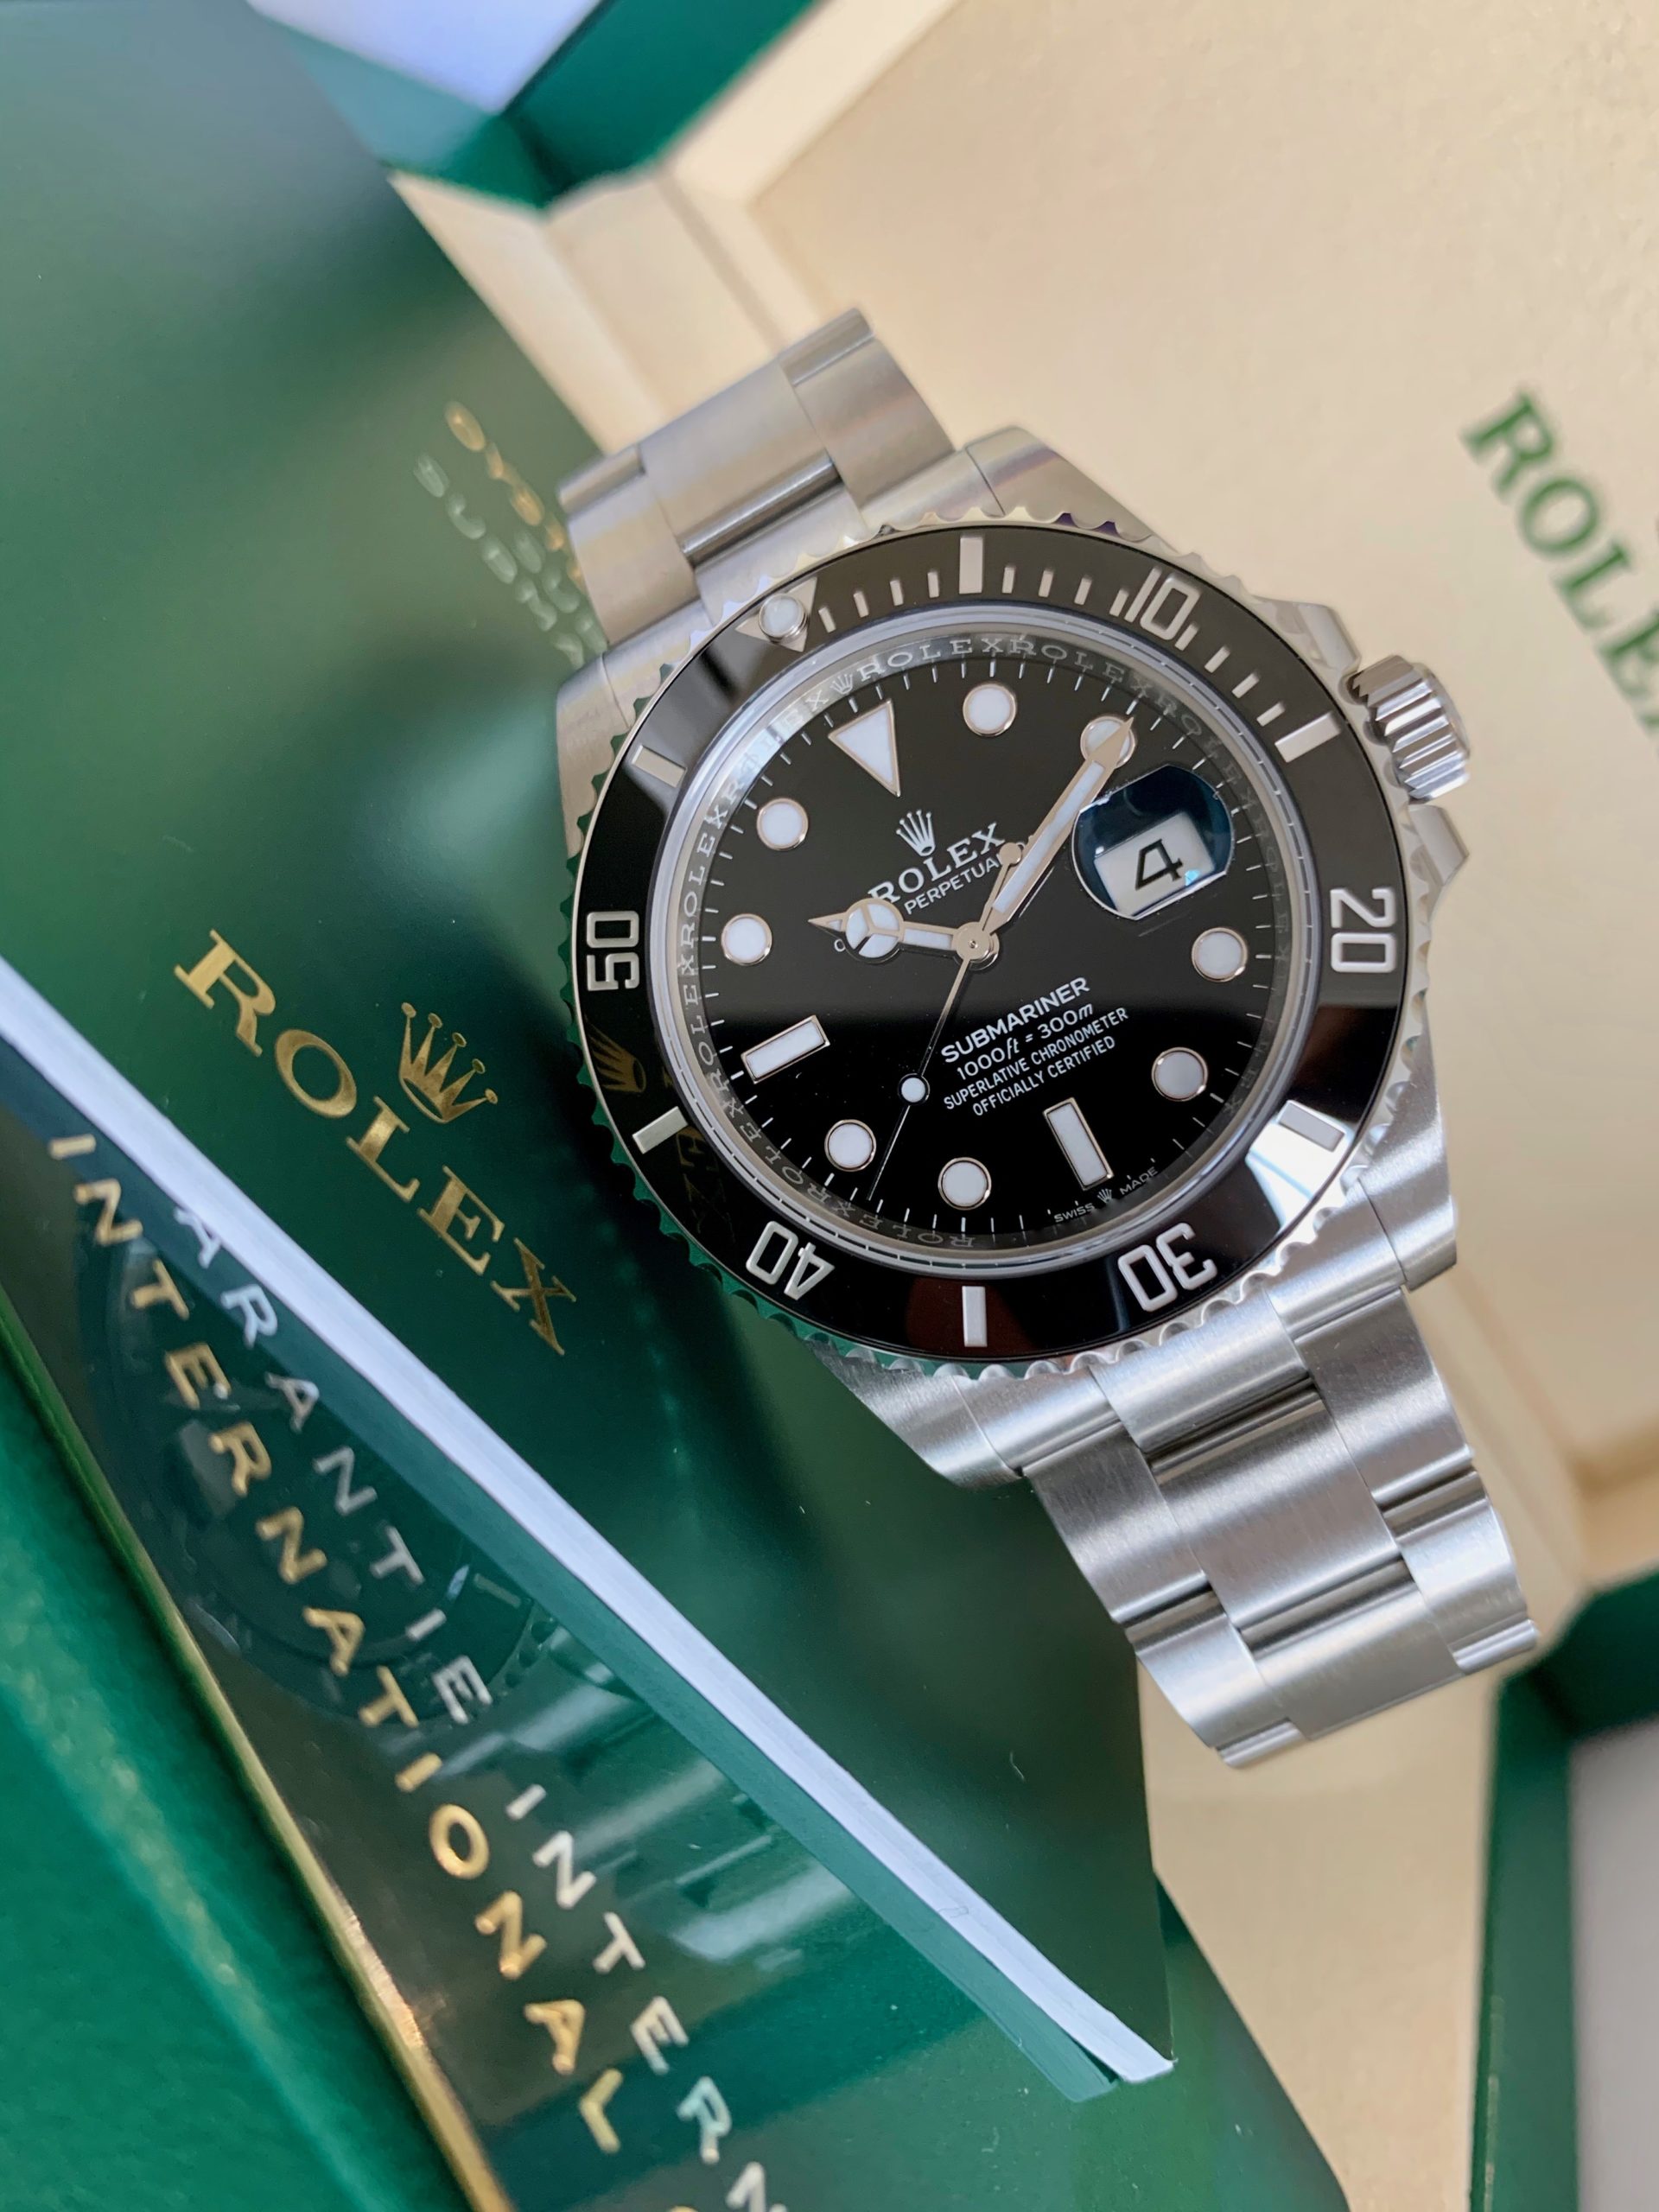 NEW STYLE ROLEX SUBMARINER DATE MODEL 126610LN - Carr Watches